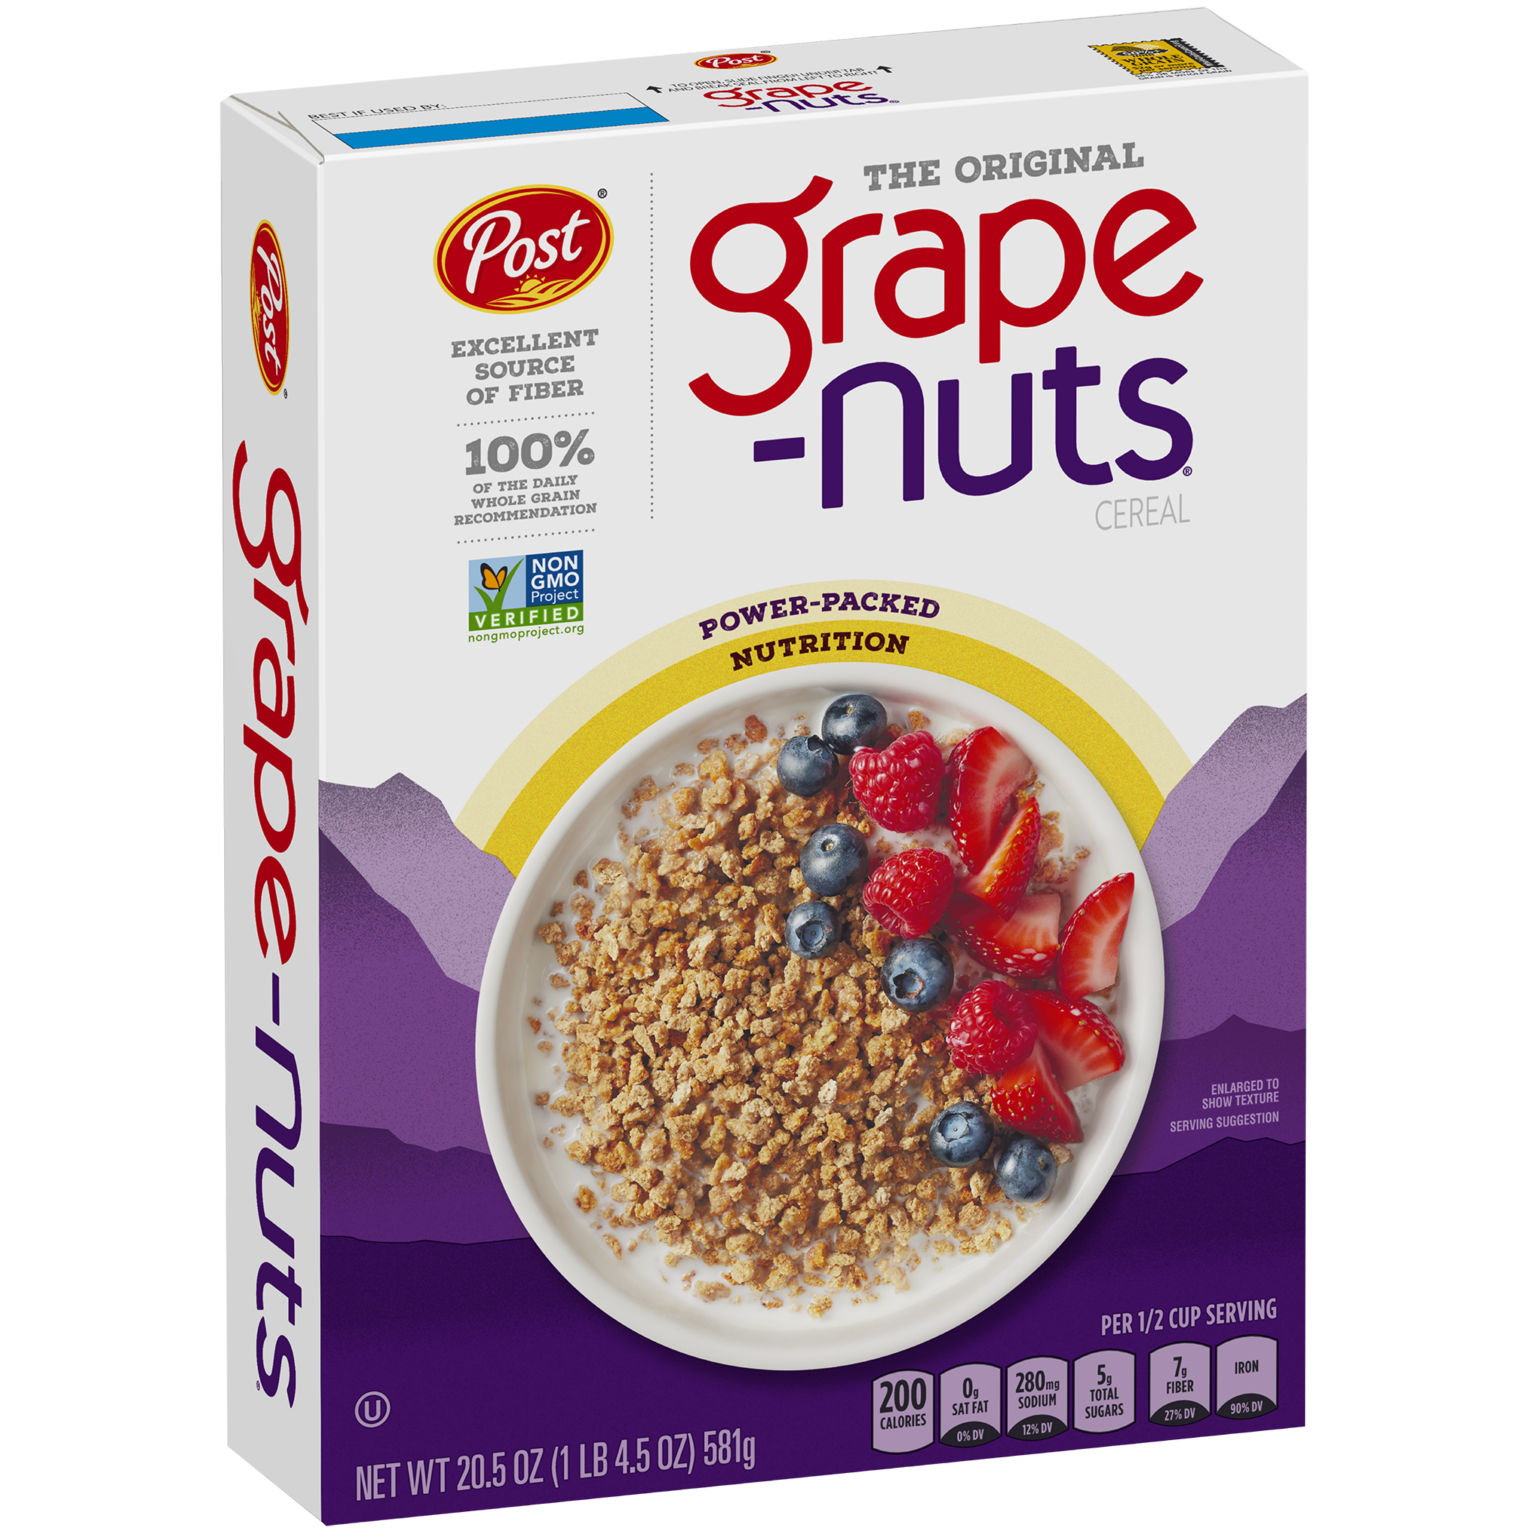 Grape-Nuts® cereal - Post Consumer Brands